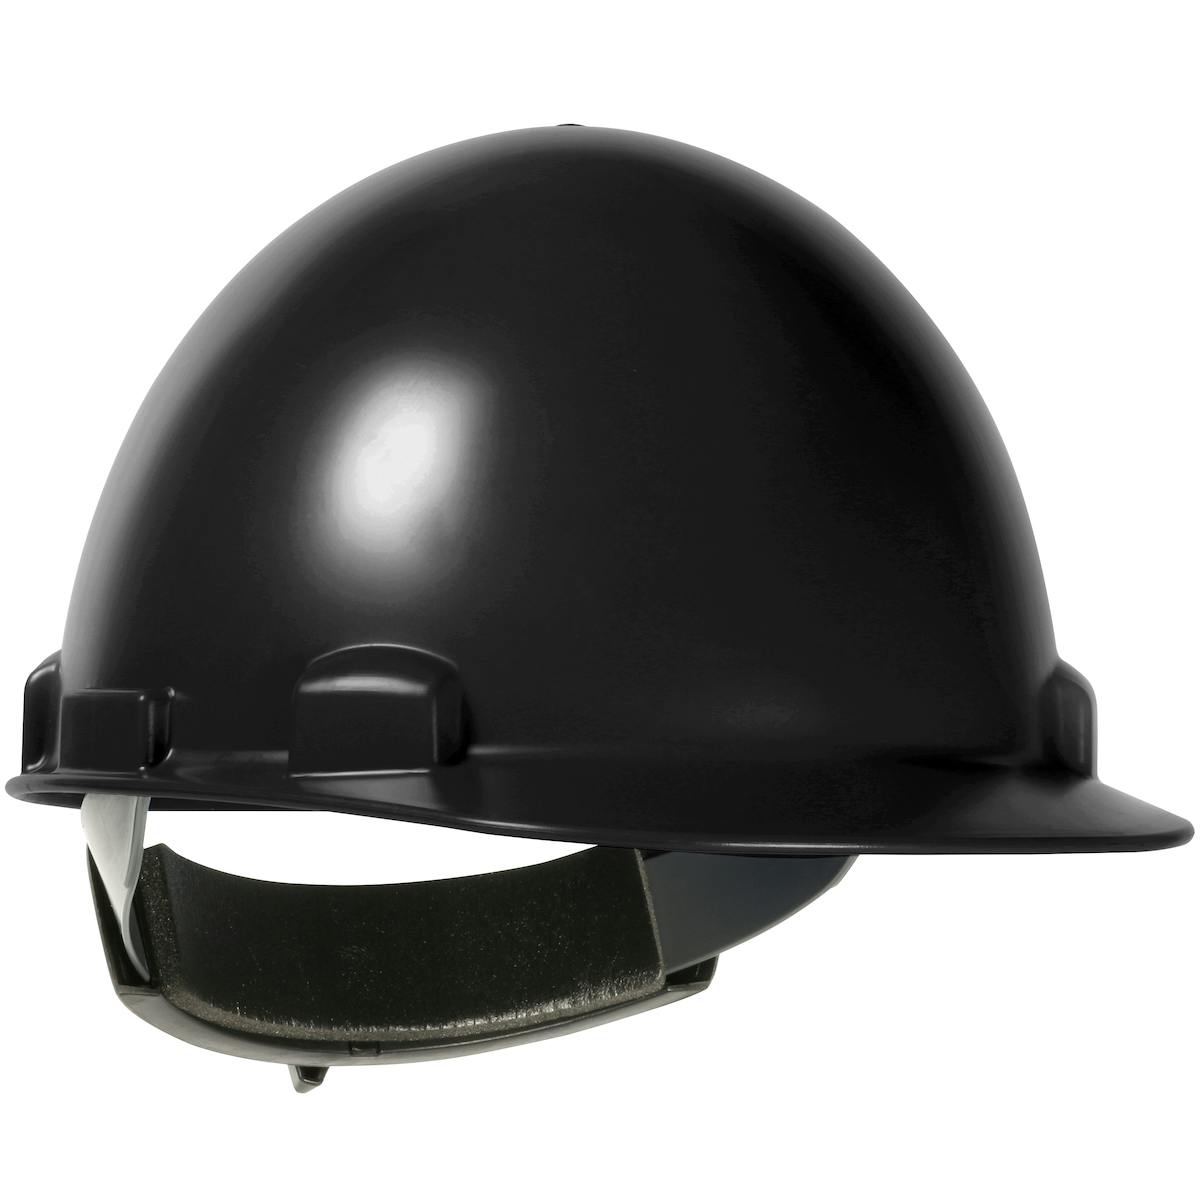 Stromboli™ Cap Style Smooth Dome Hard Hat with ABS/Polycarbonate Shell, 4-Point Textile Suspension and Wheel-Ratchet Adjustment (280-HP841R)